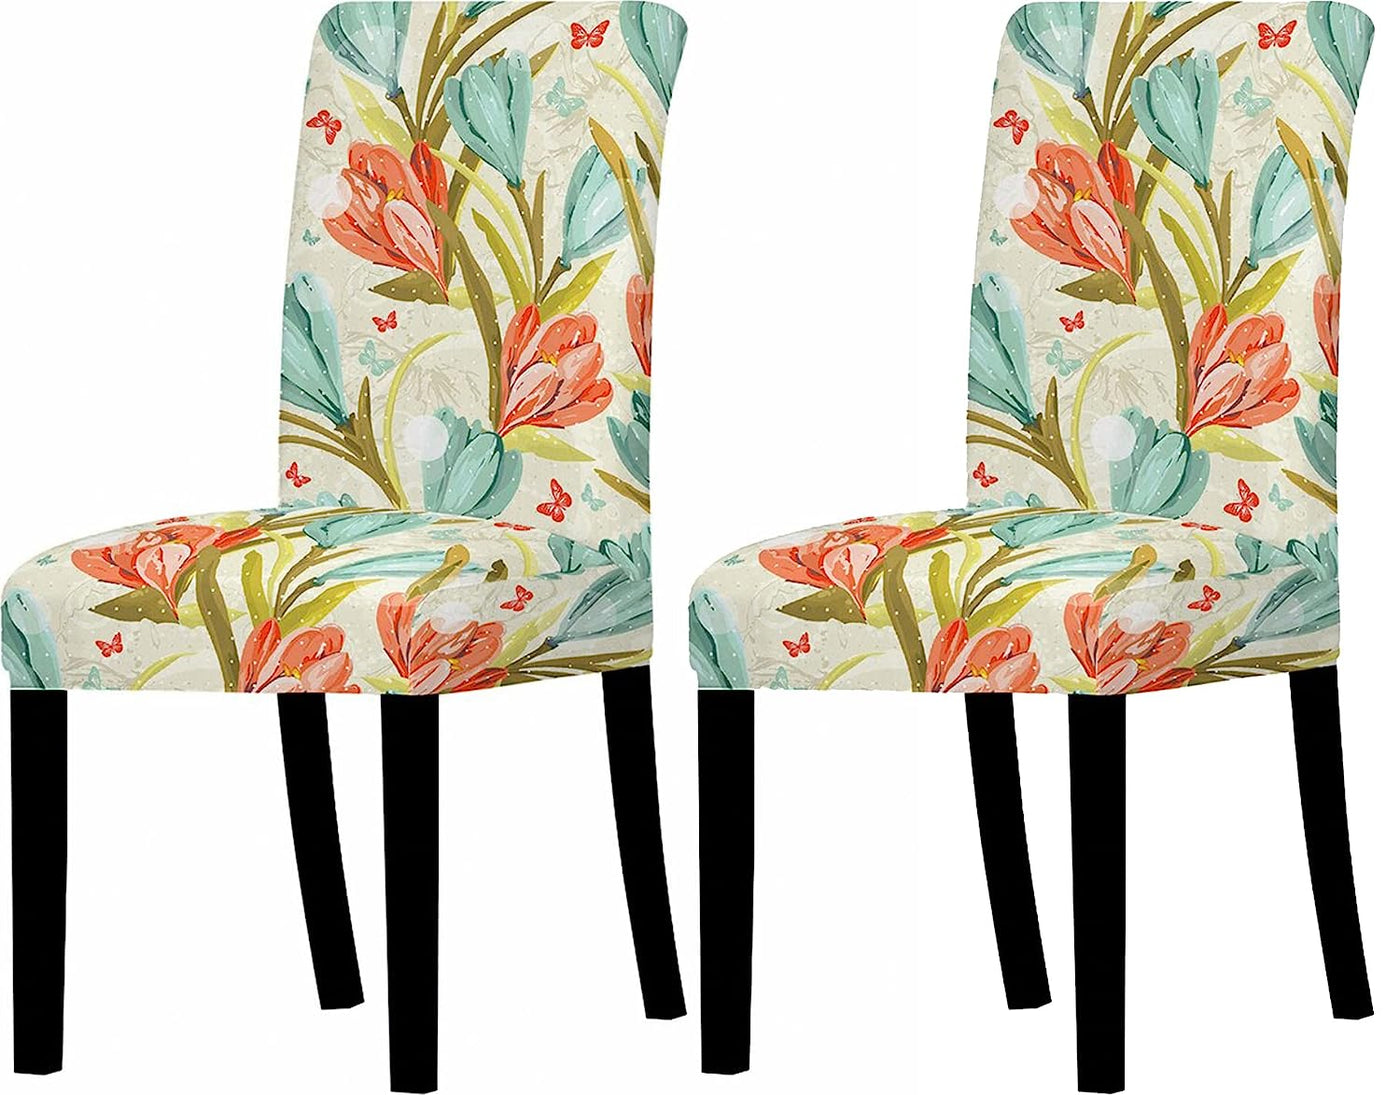 Printed Floral Chair Cover-Multi Flower